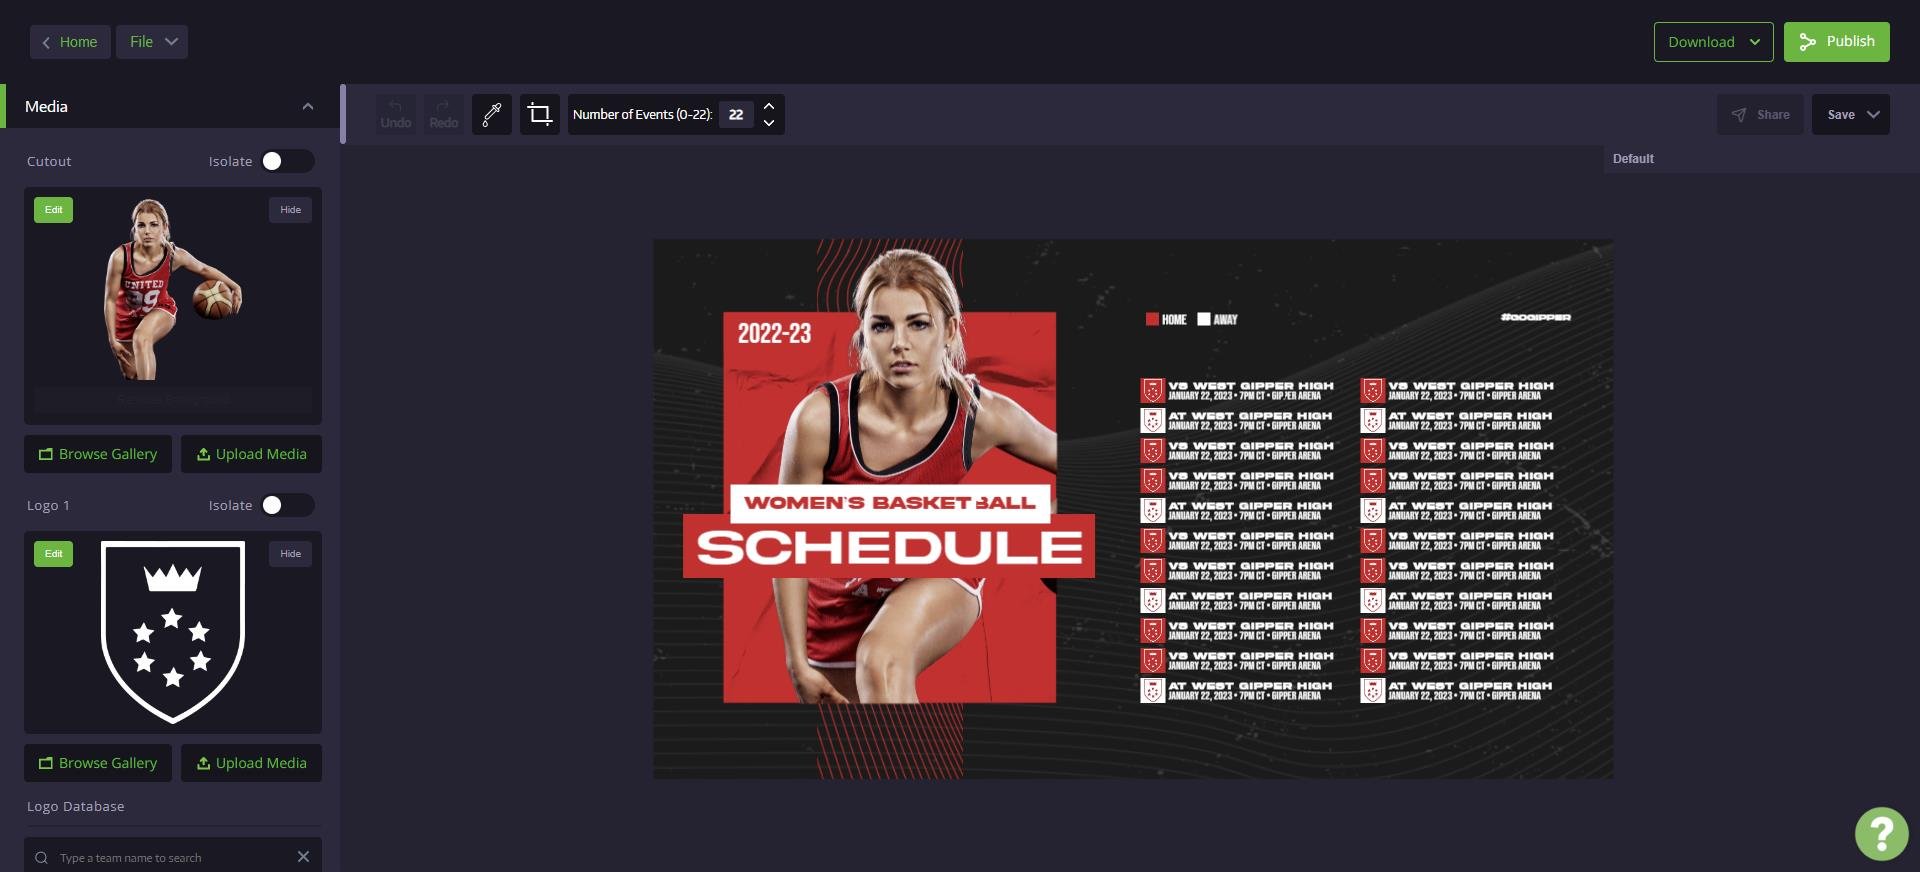 template editor showing schedule graphic where user can change color, text, and images to match their branding
